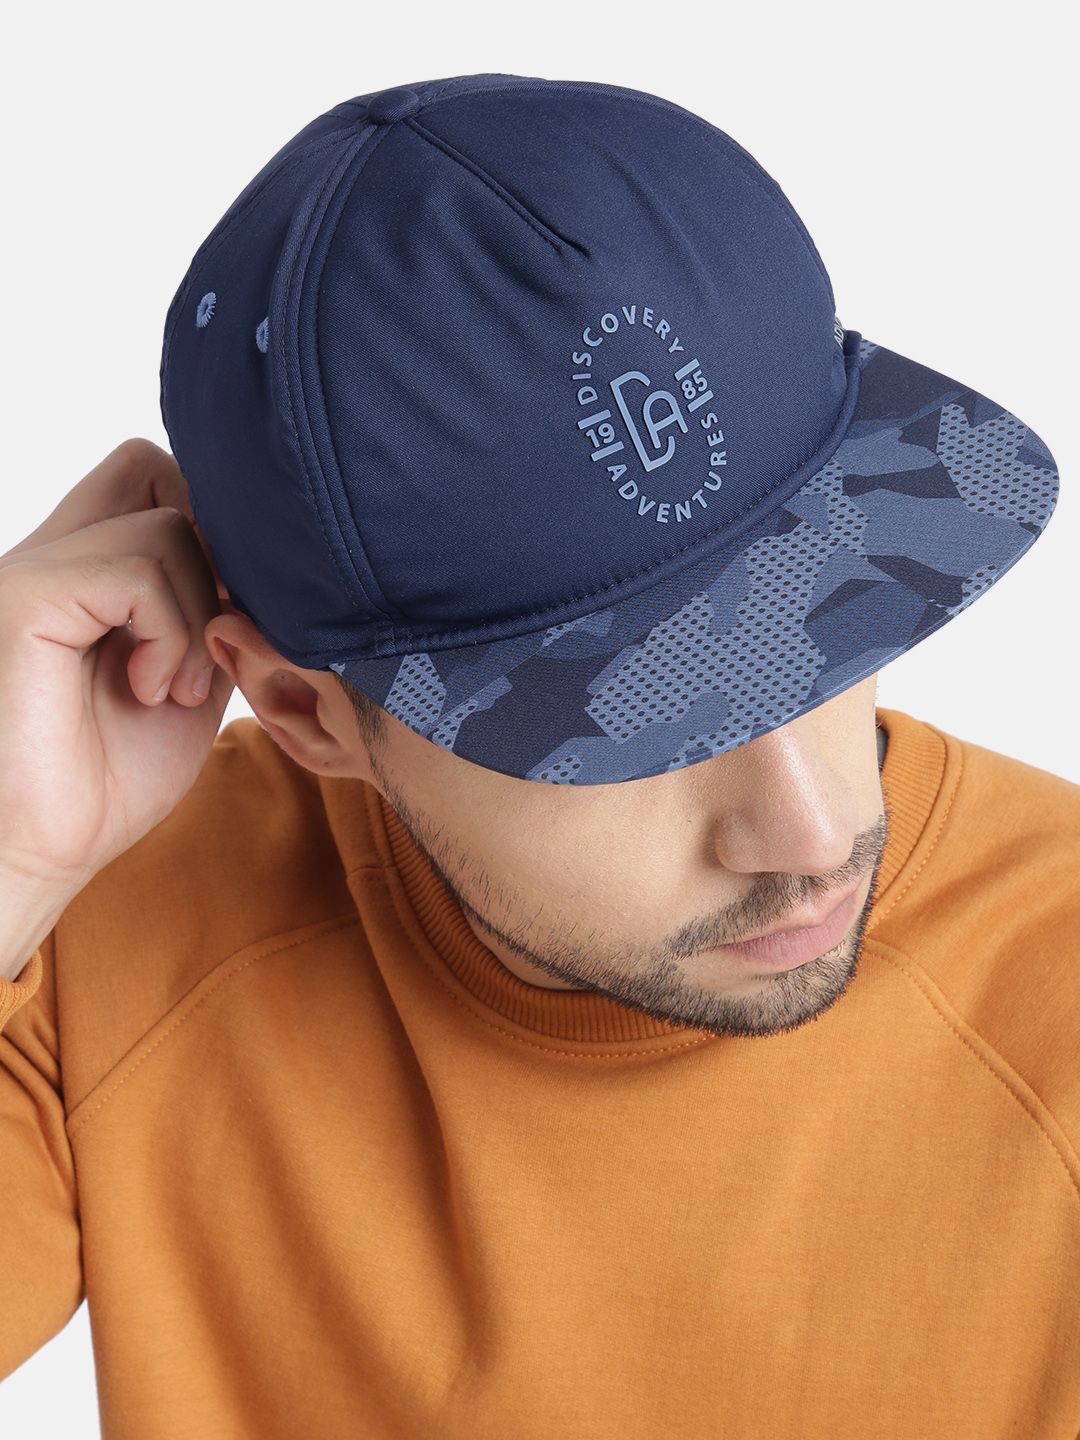 Roadster Unisex Blue Printed Discovery Snapback Cap Price in India